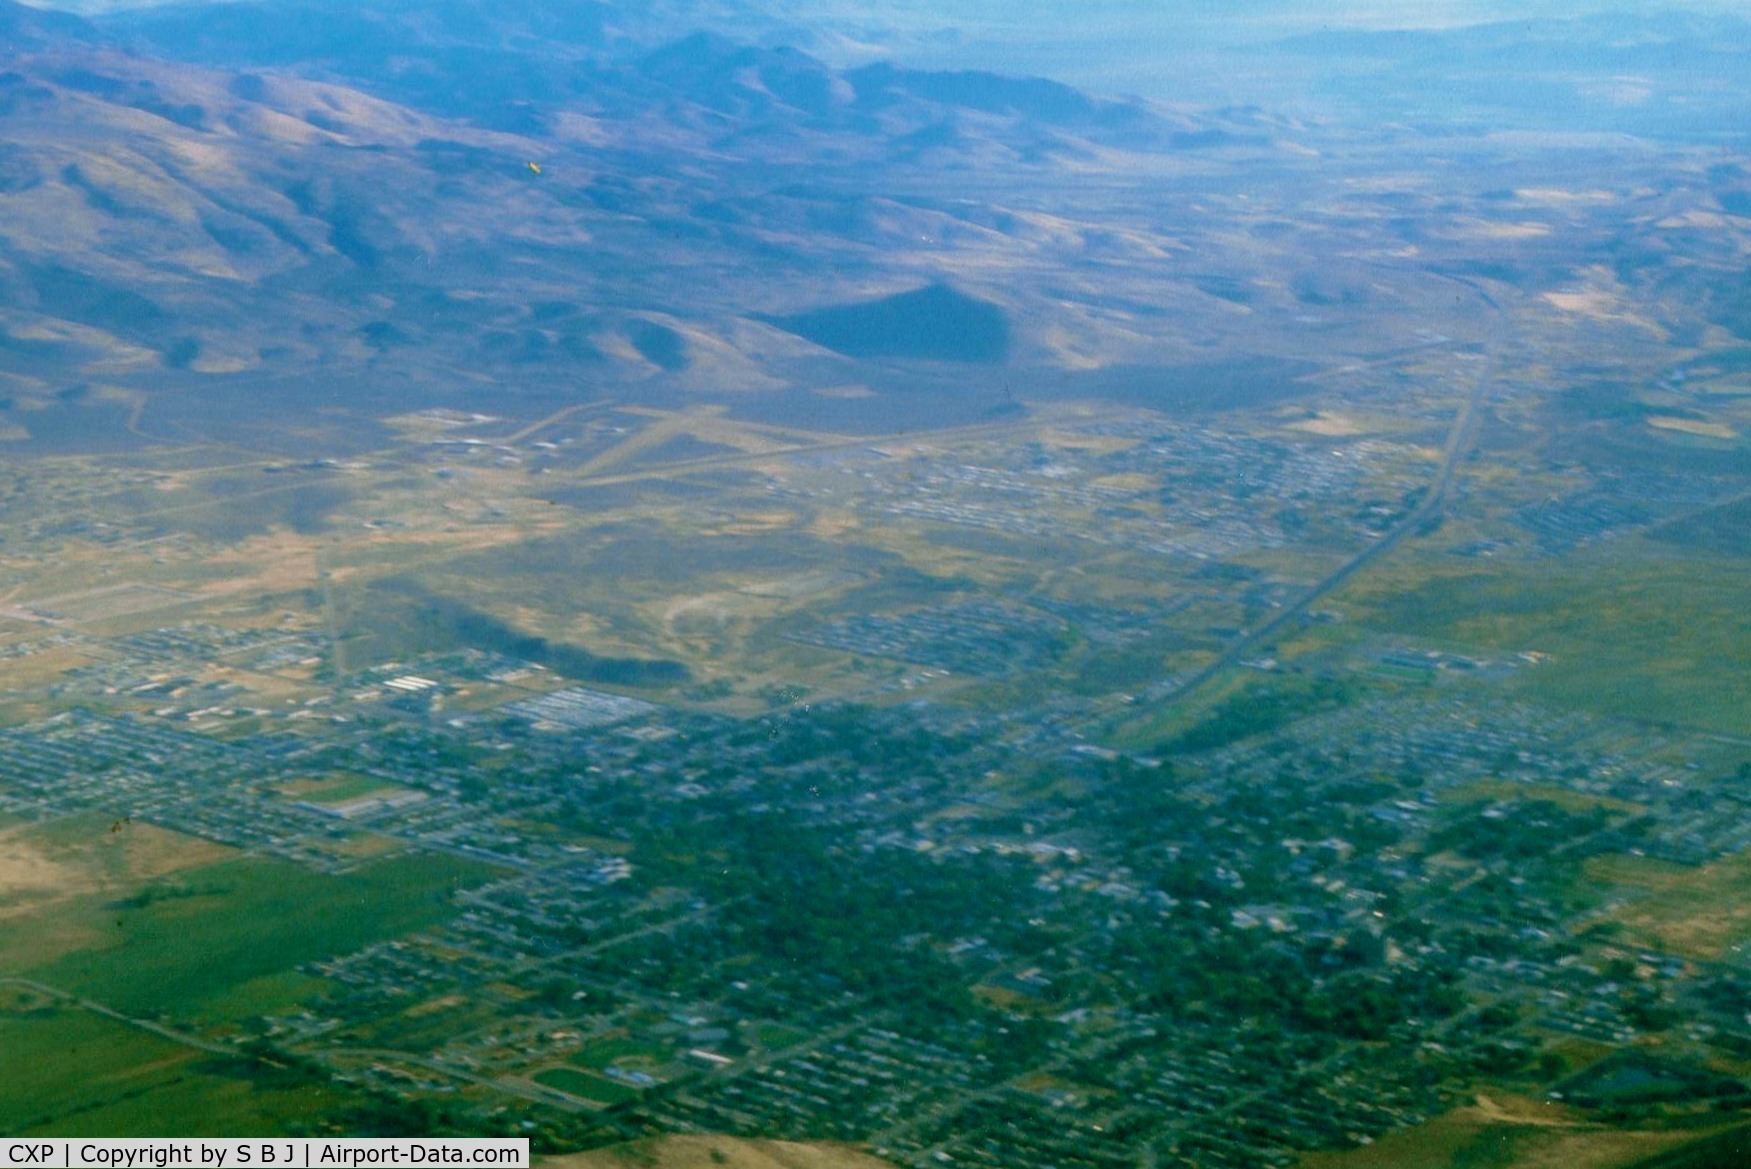 Carson Airport (CXP) - Carson City is seen near mts.Dirt crosswind runway(seen best) was welcome on one arrival with gusty 35kt winds with 5-10 seconds of dead calm mixed in .Nasty stuff but the dirt runway was perfectly aligned for my Tcraft.View is north.